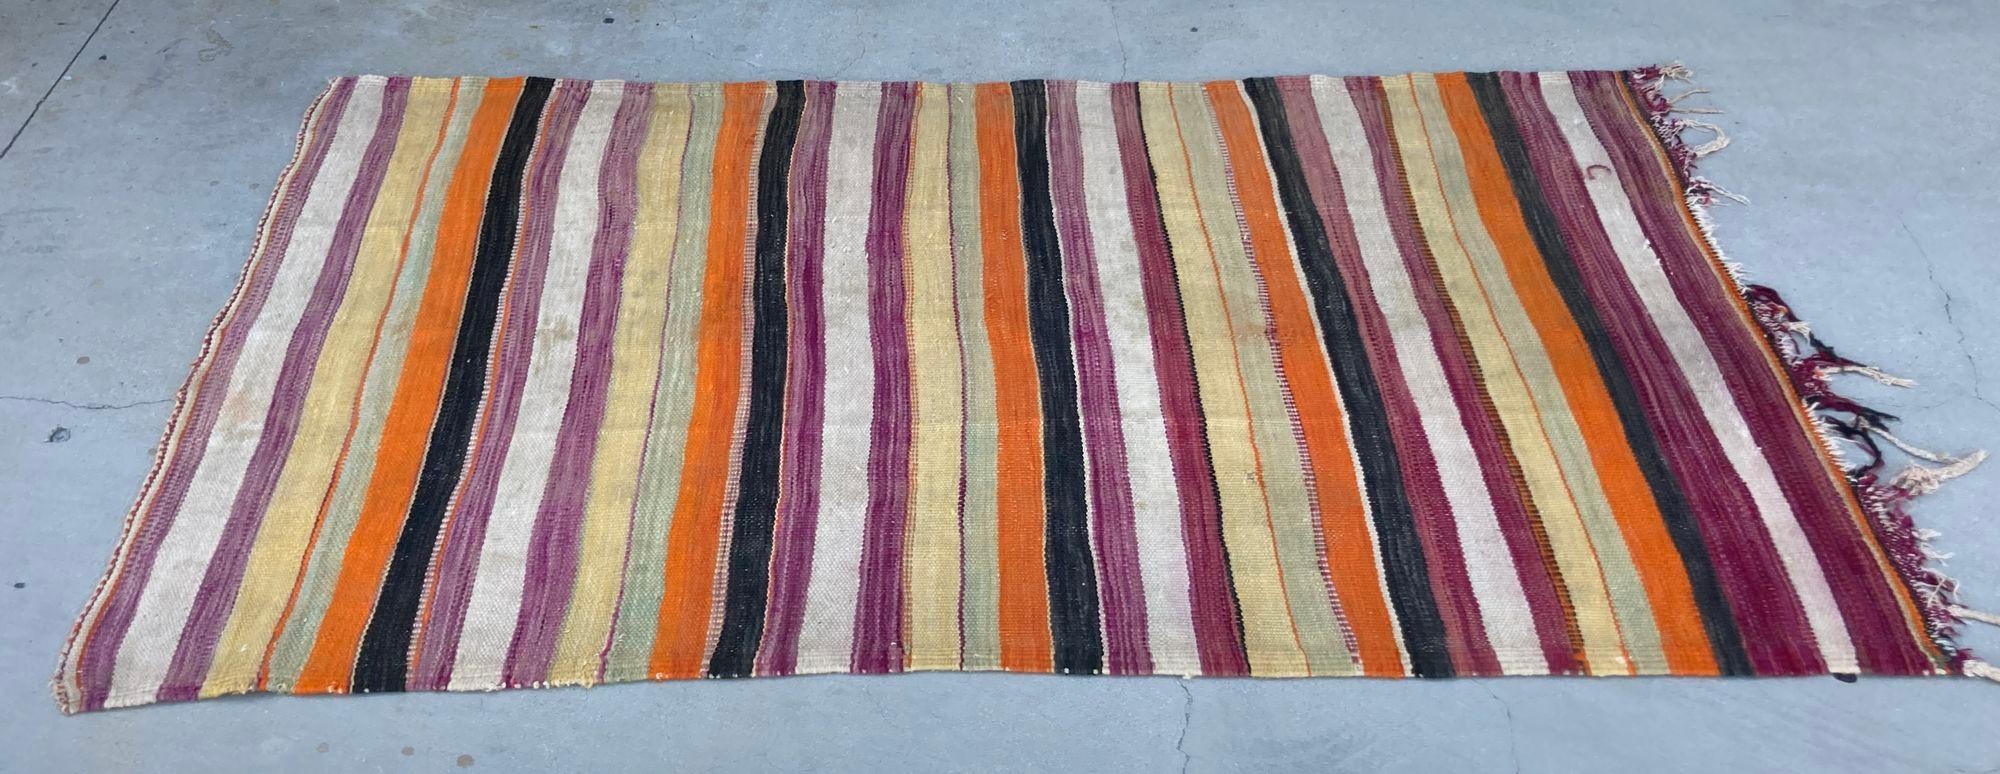 Hand-Woven 1960s Moroccan Tribal Rug Handwoven North African Ethnic Textile Floor Covering For Sale